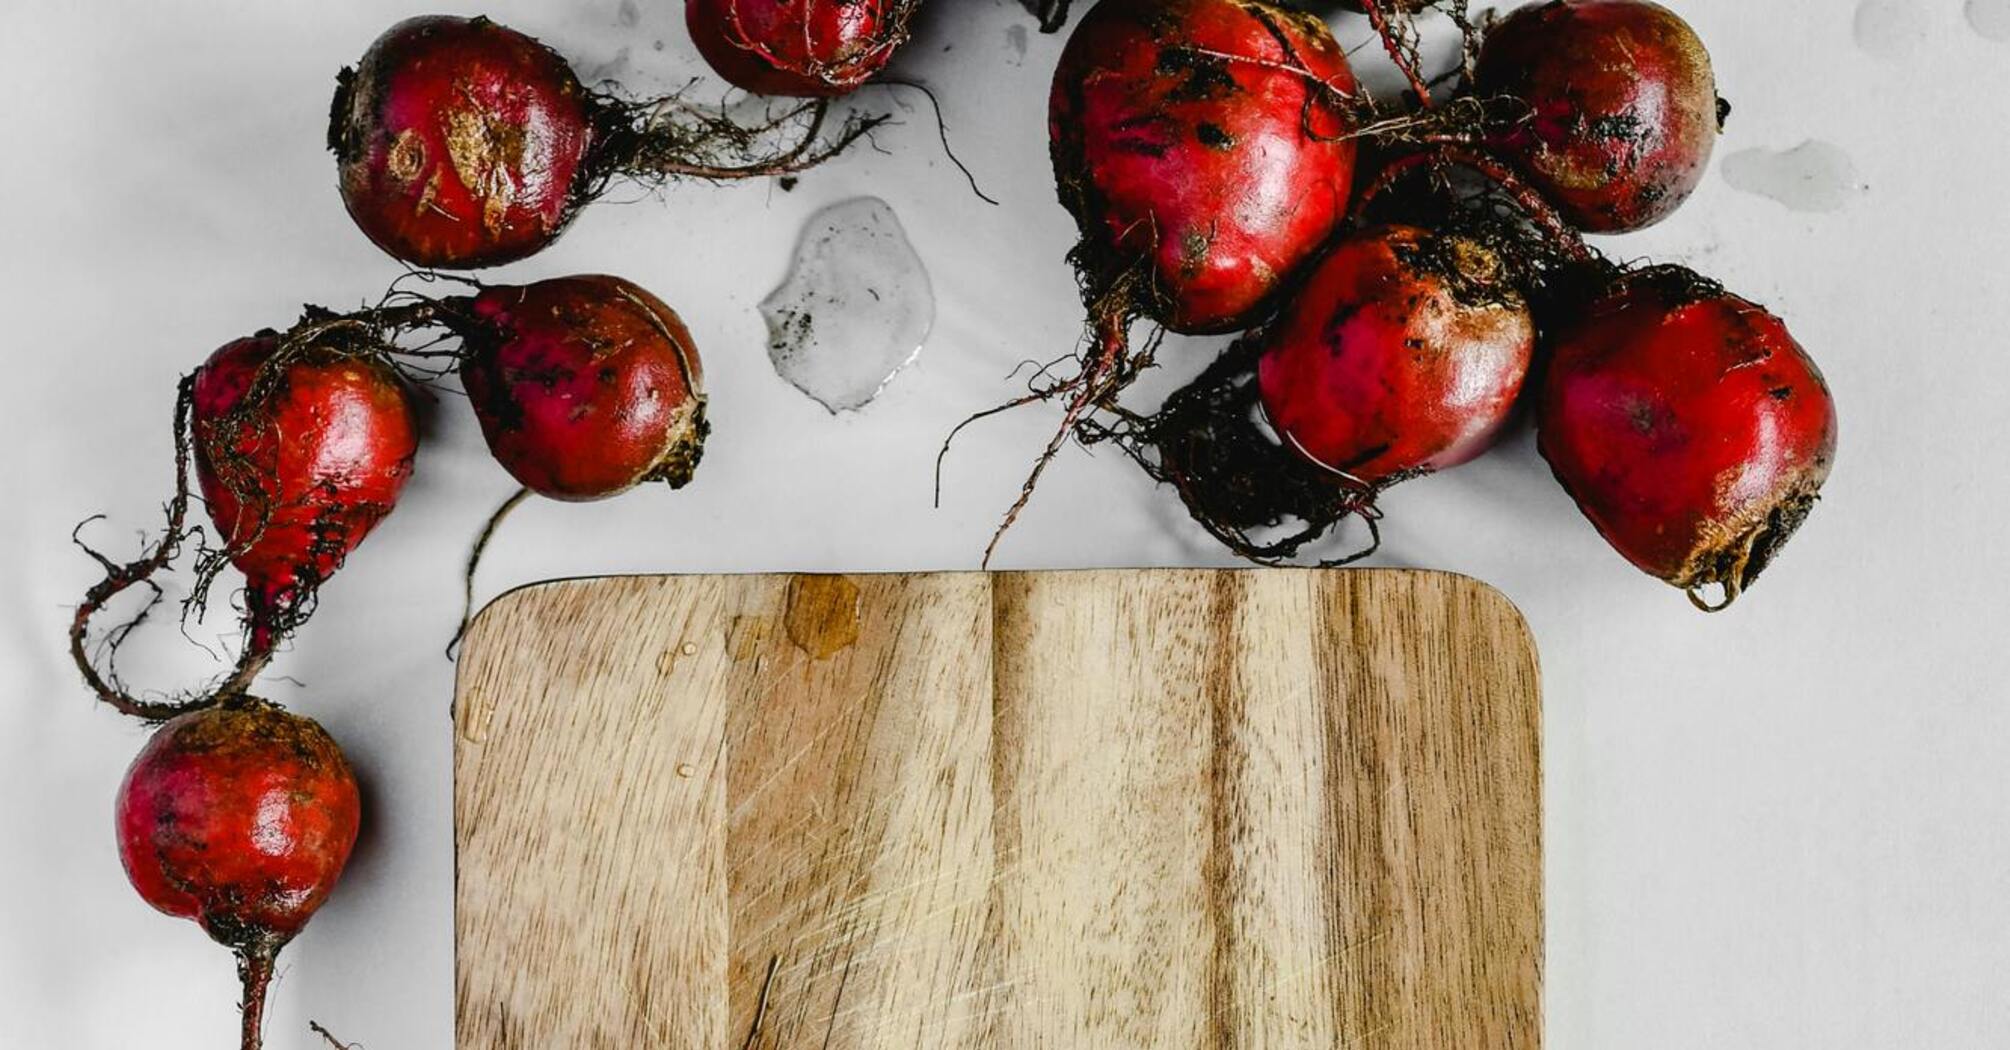 How to cook beets quickly and efficiently